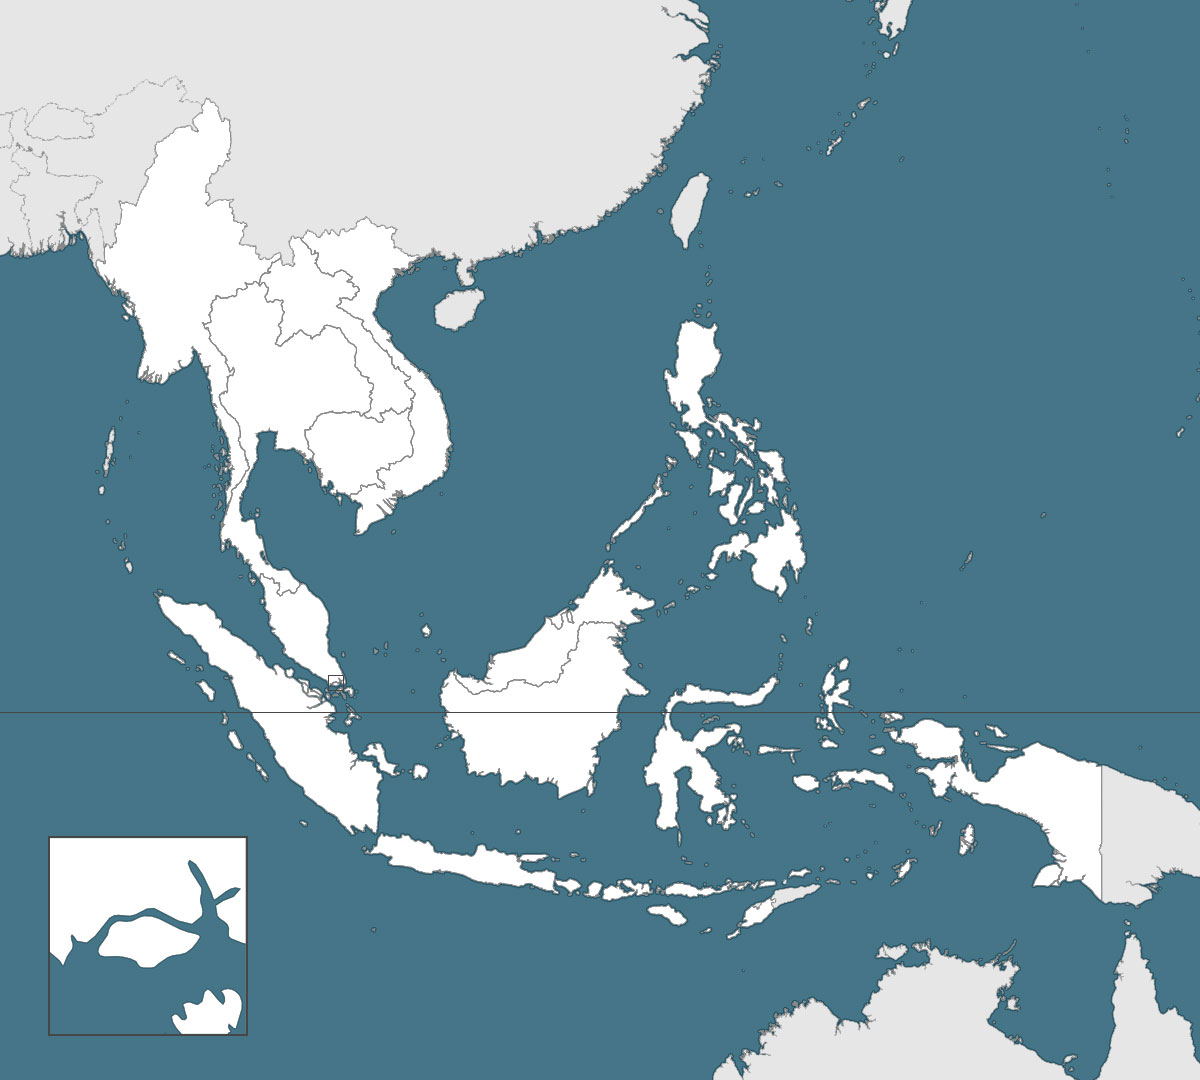 Blank map of ASEAN with countries borders and dark background